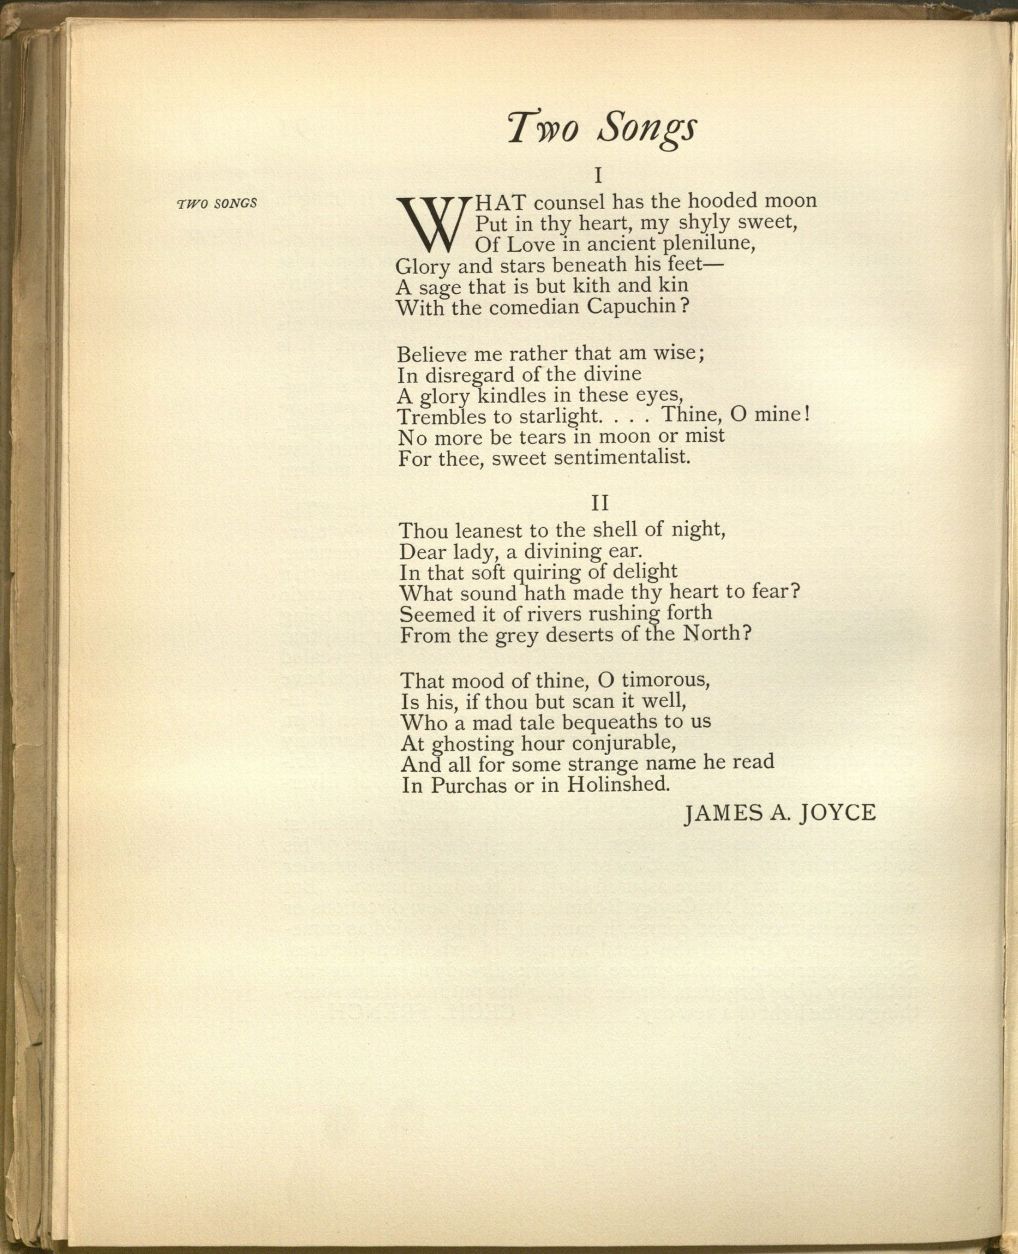 Image of Two Songs by James Joyce, published in The Venture (1905)